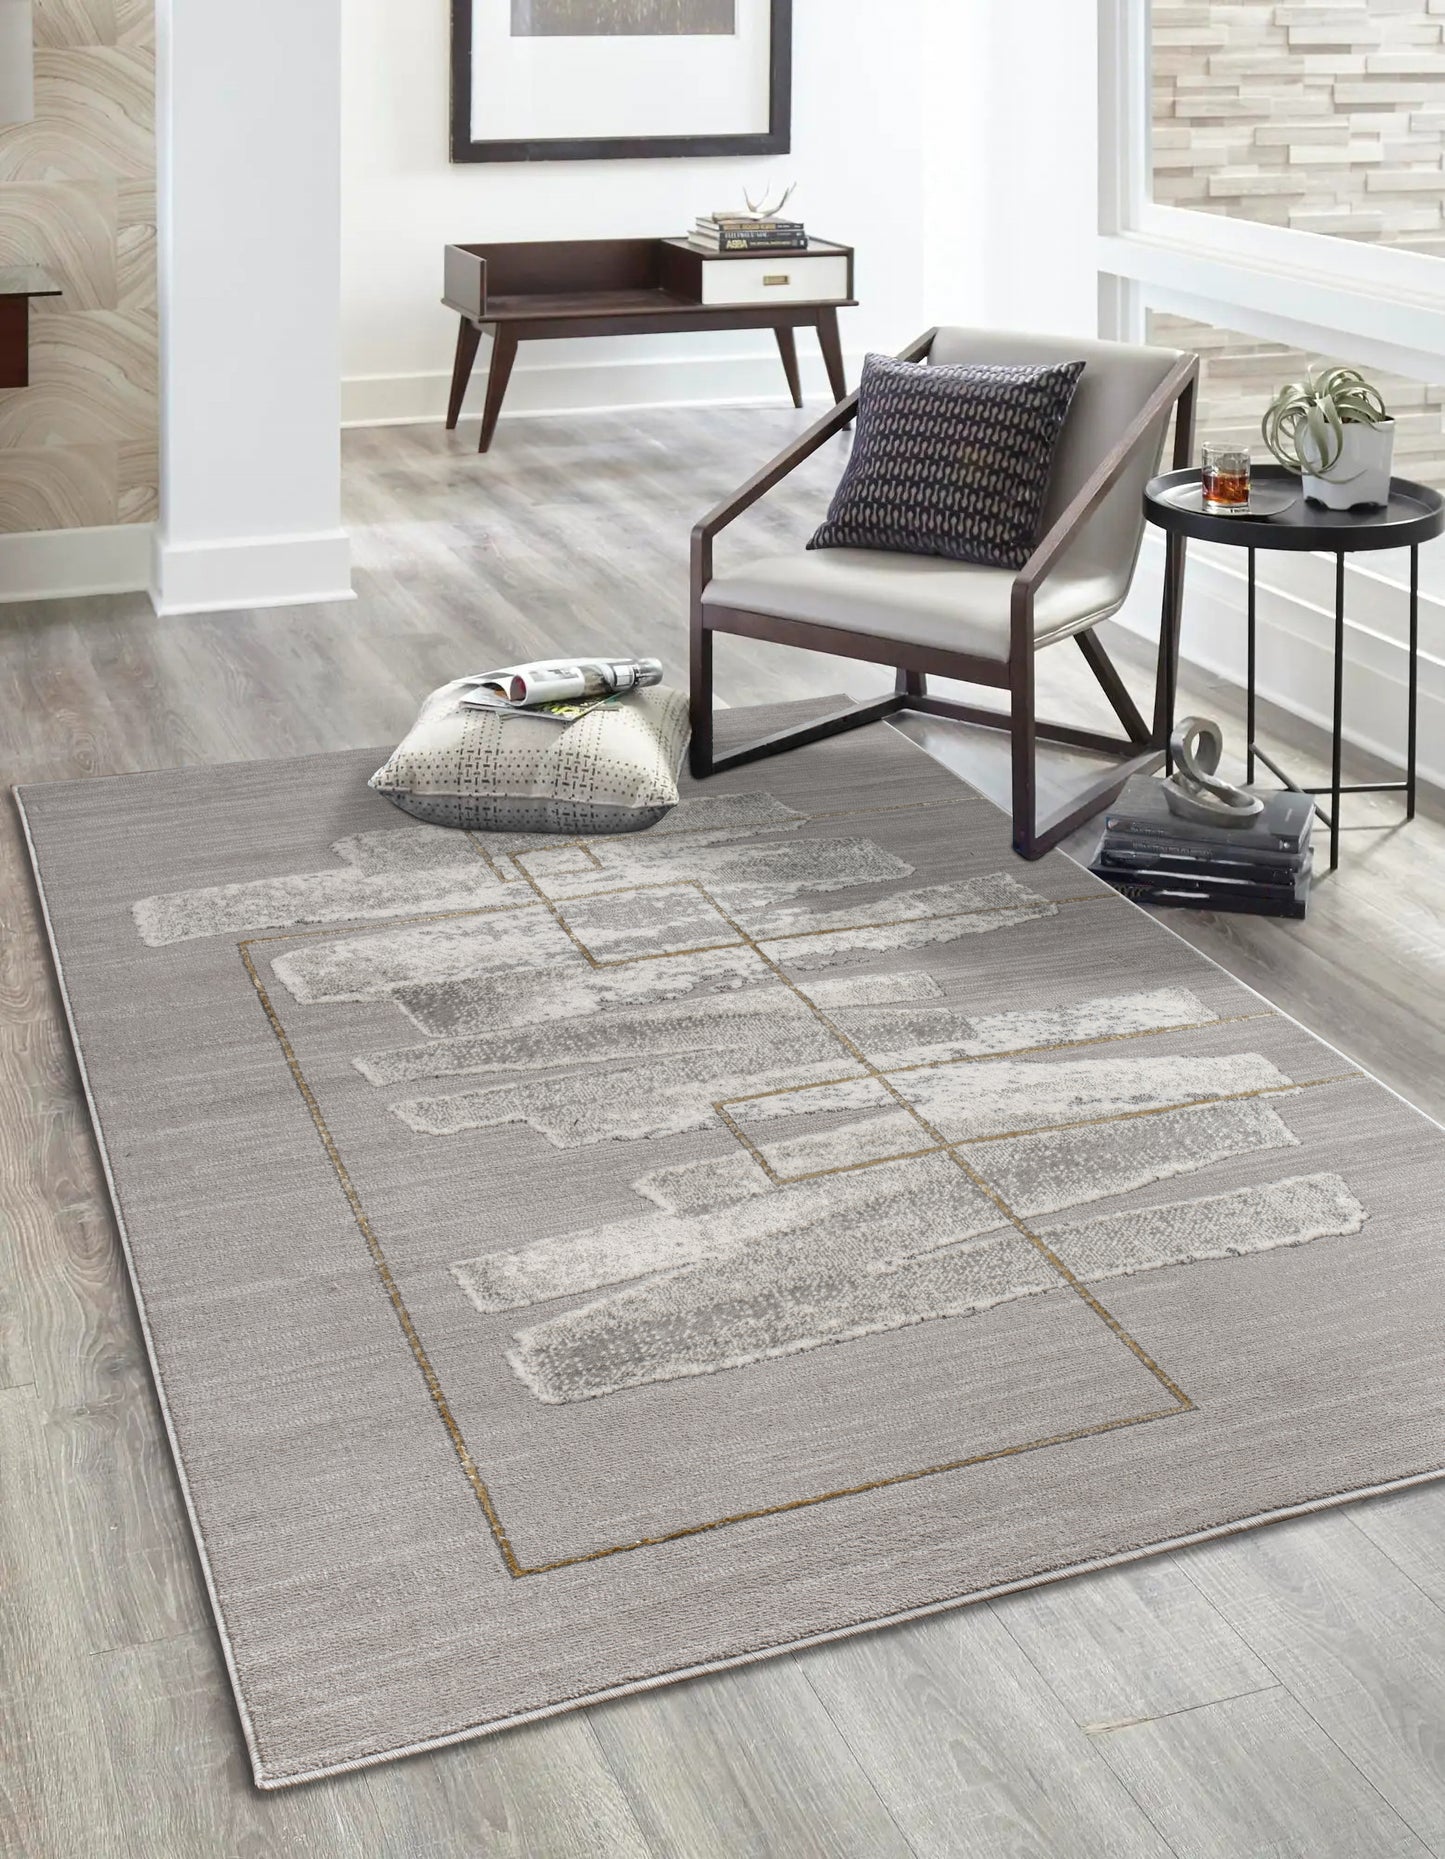 Gold Grey Abstract Modern Living Room Bedroom Area Rug